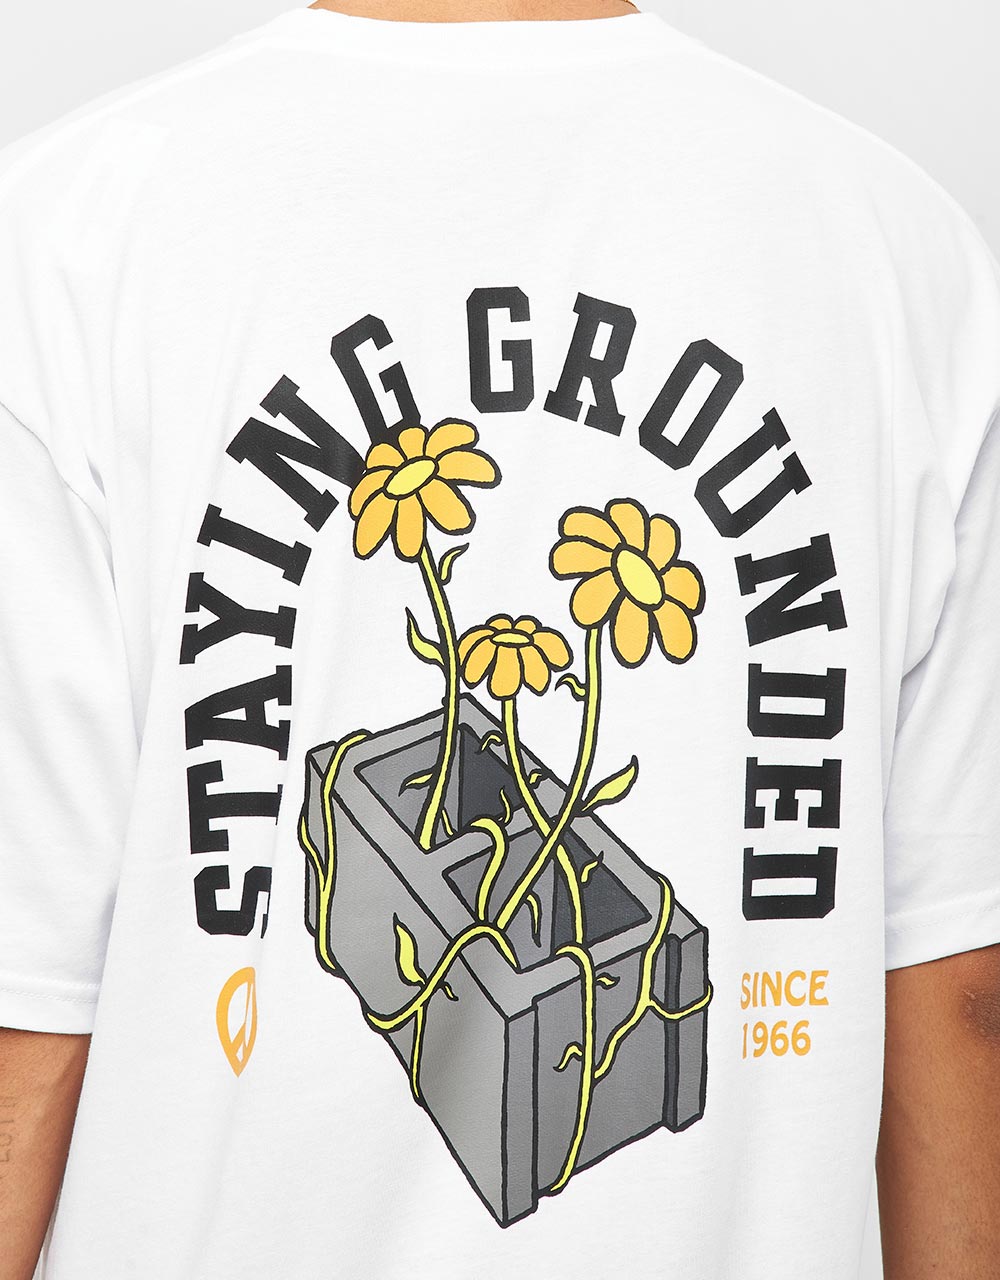 Vans Staying Grounded T-Shirt - White/Black